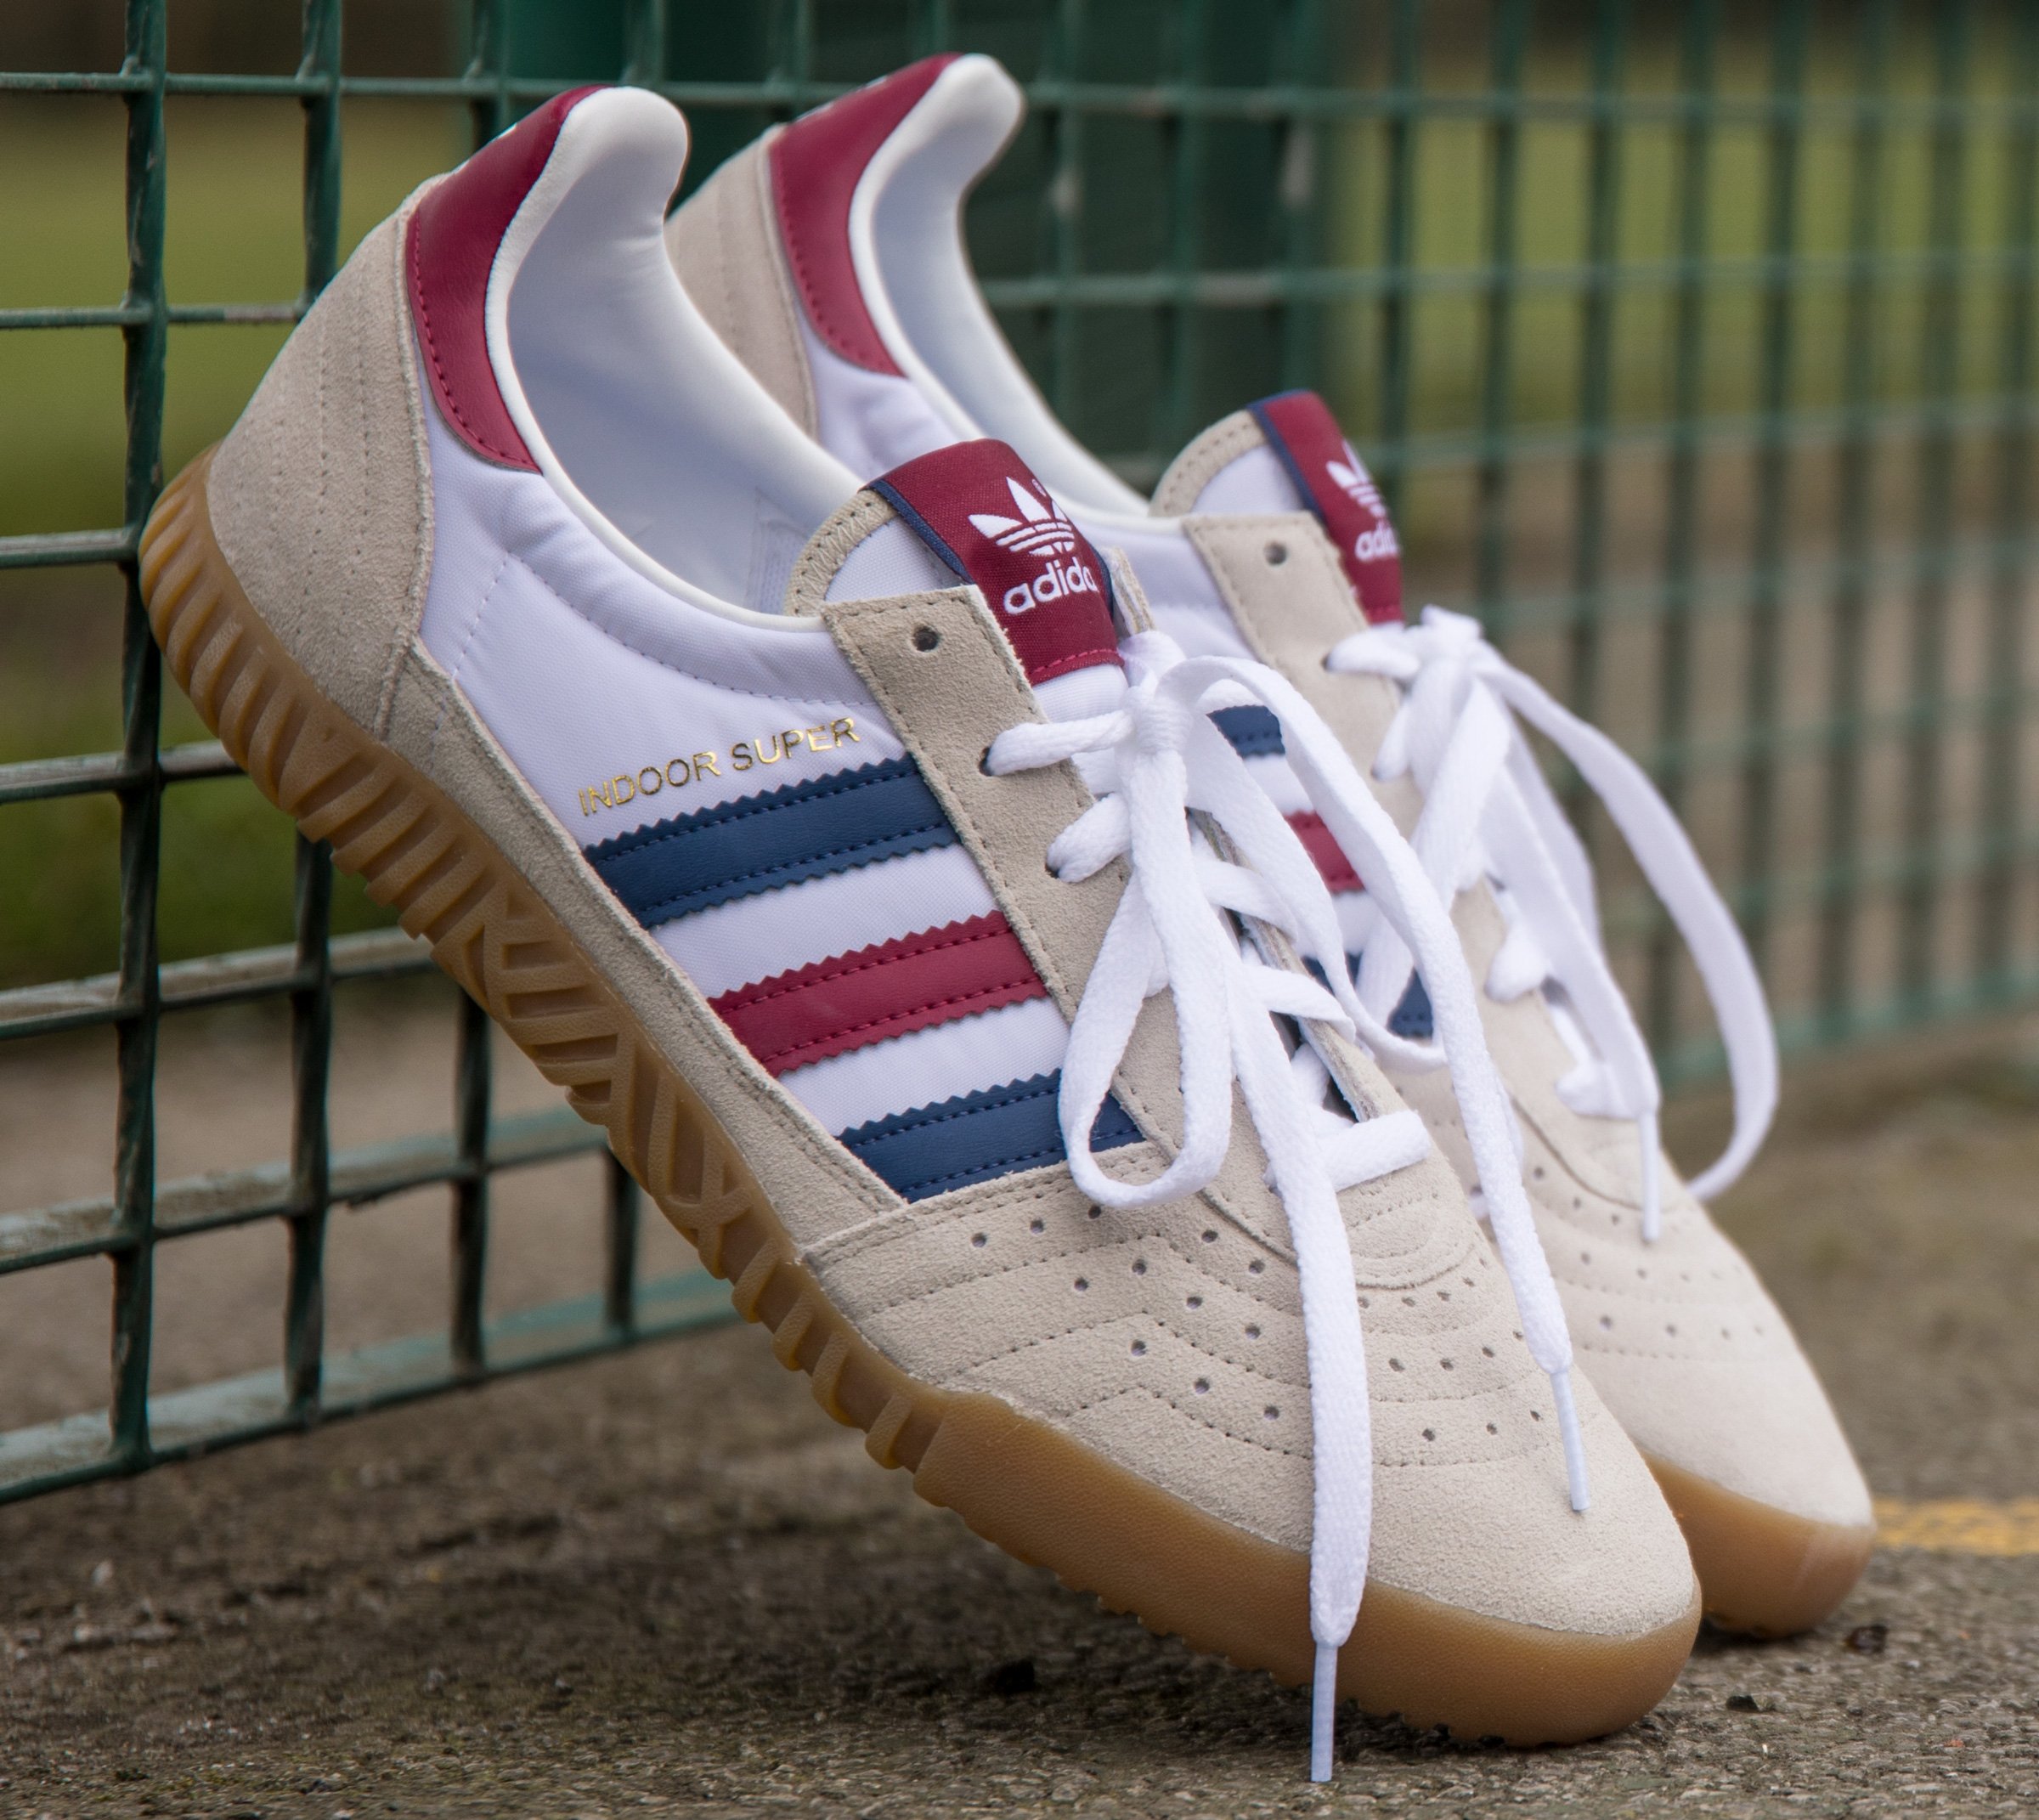 Stone Menswear on Twitter: "#ADIDAS CLEAR BROWN AND INDOOR SUPER TRAINERS has shown its true colours by shining through as a classic and traditional shape worn by the casual masses and